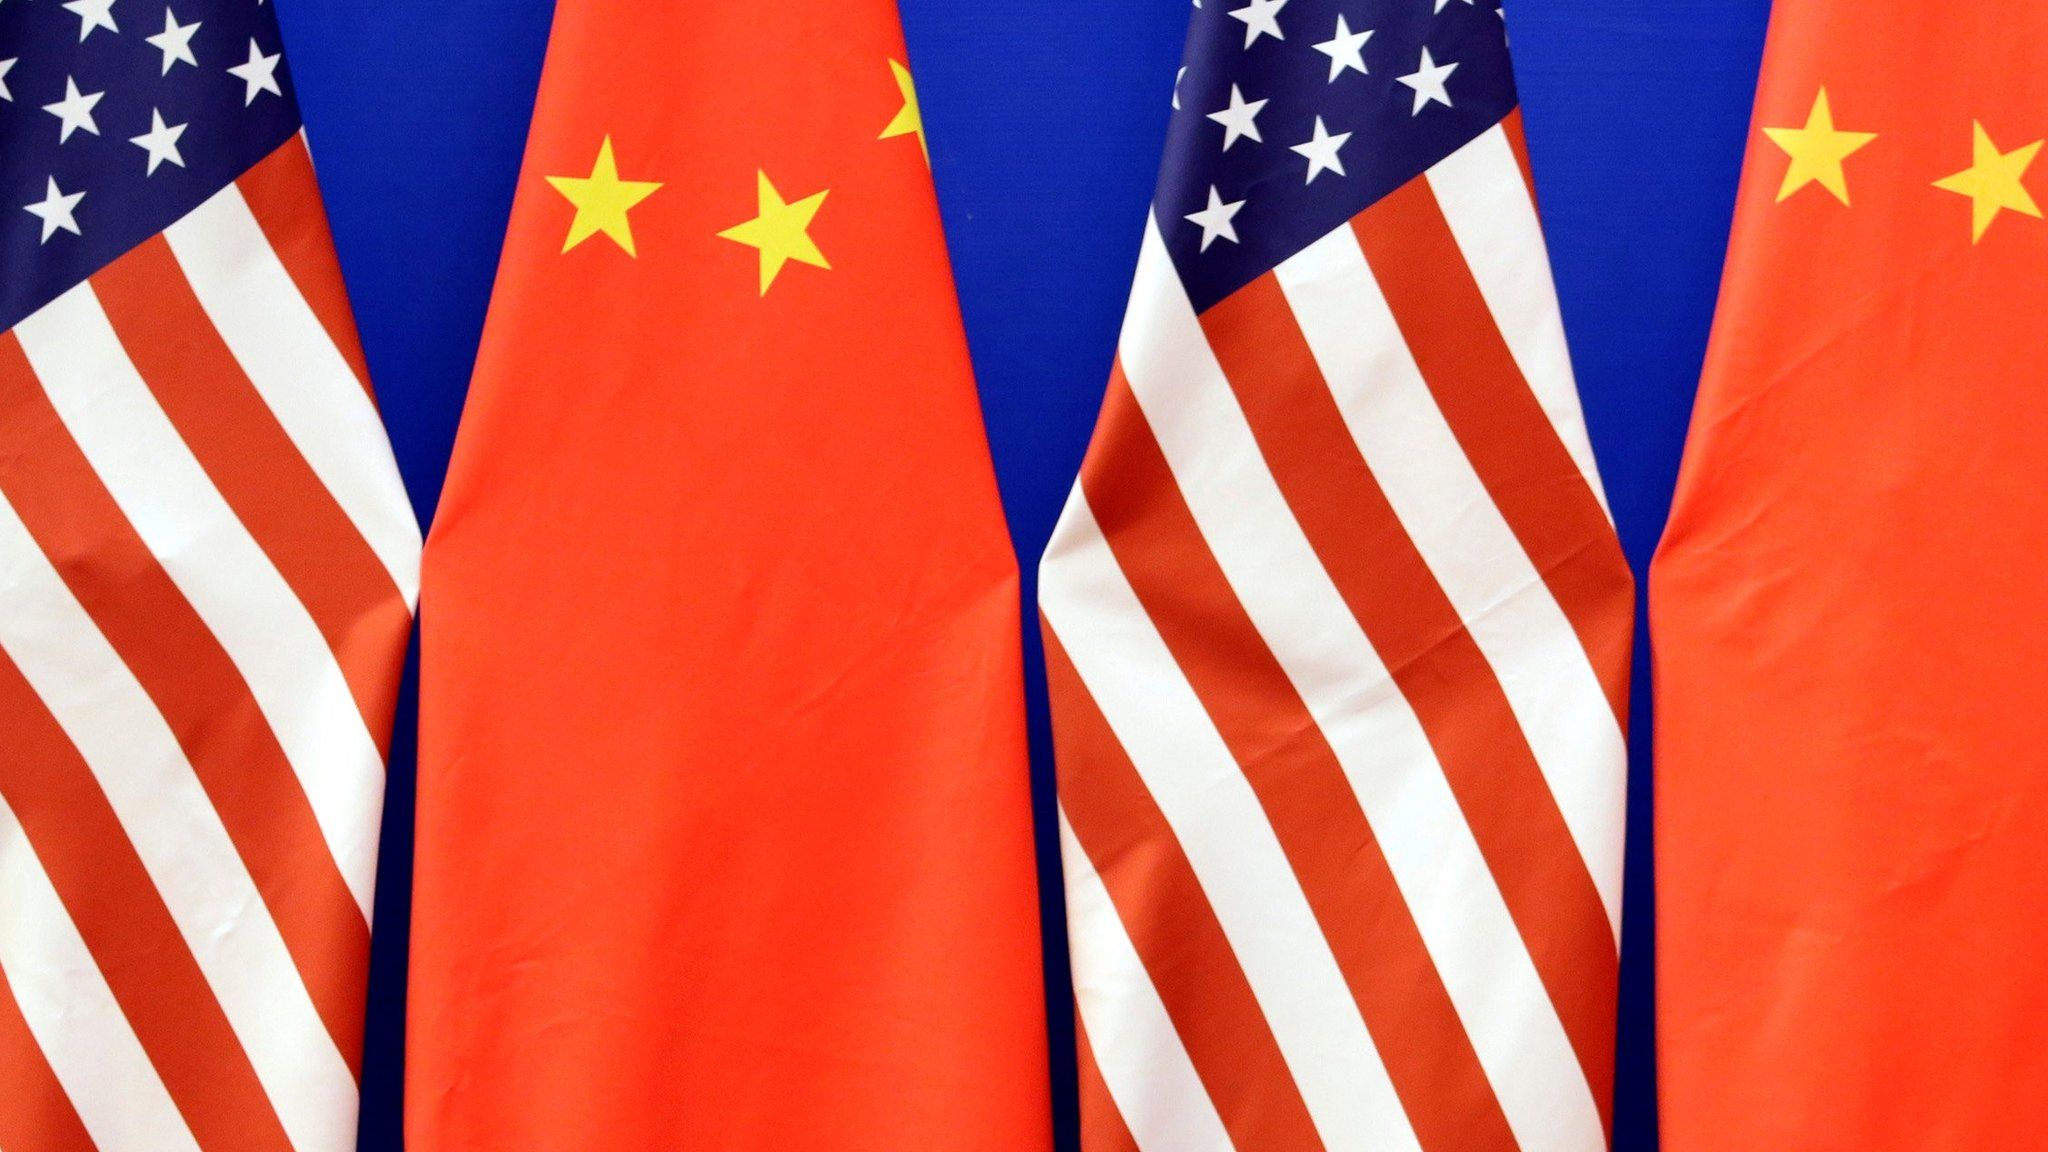 US and Chinese national flags, side by side in the Great Hall of the People in Beijing, China, July 10, 2014.